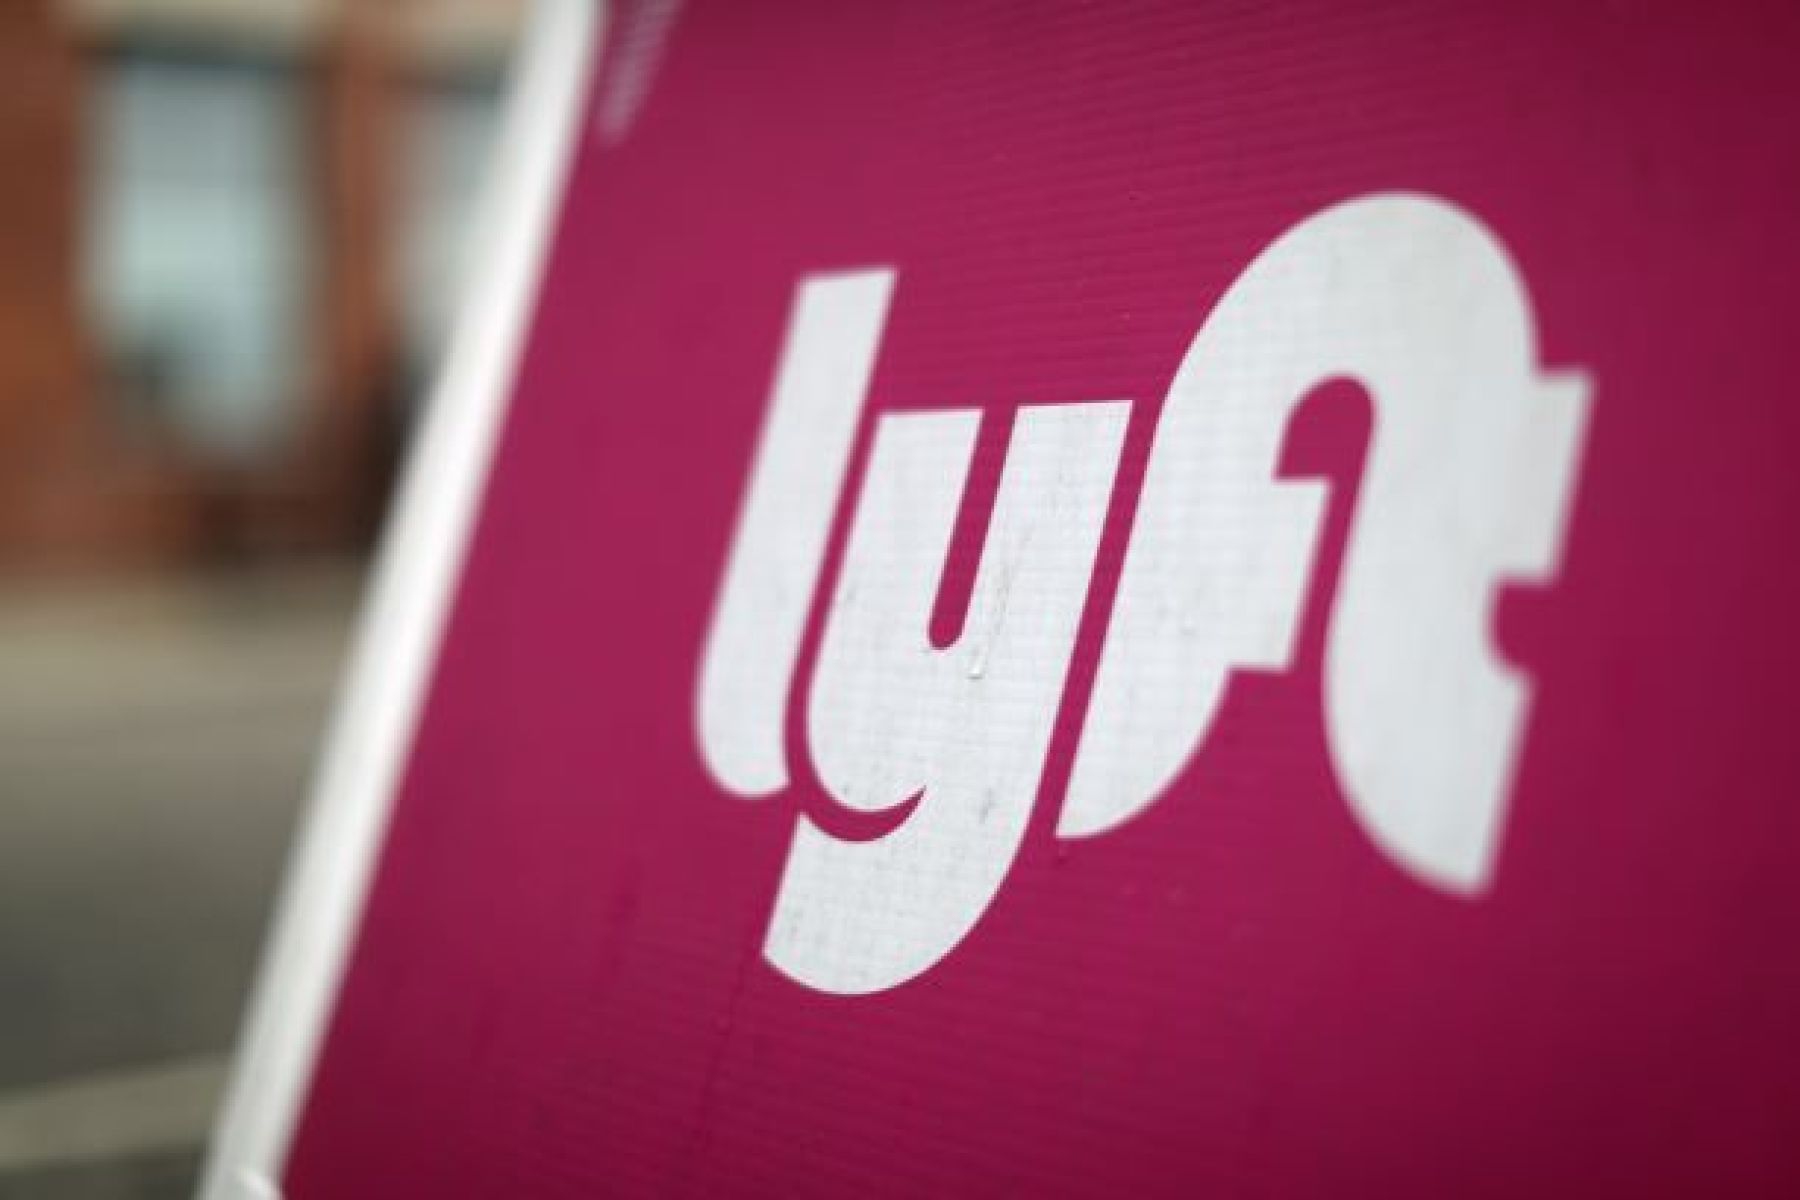 Lyft joins Uber in threatening to pull out of California over driver status